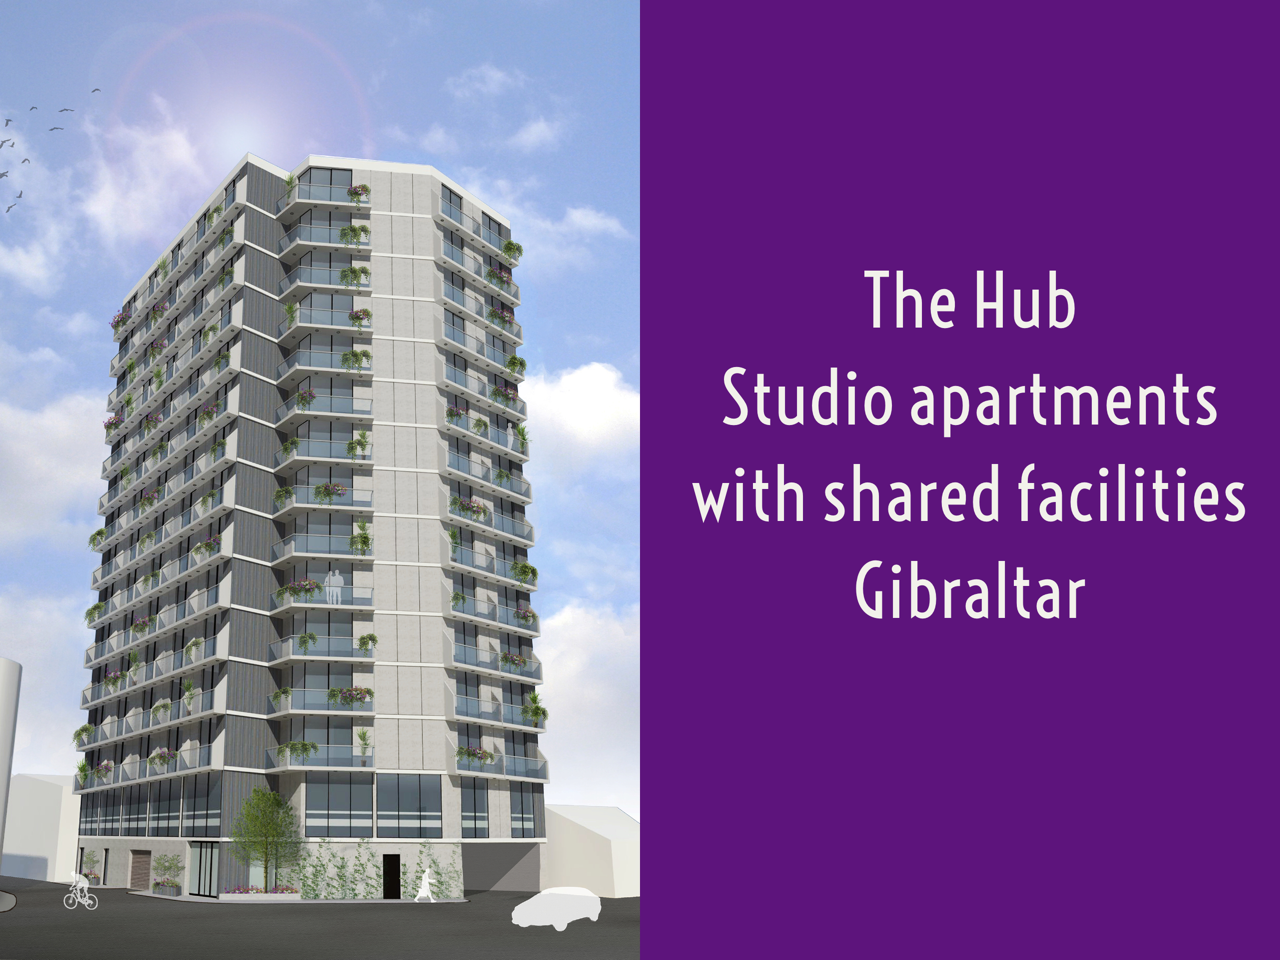 The Hub fully reserved in 7 days – waiting list now opened Image